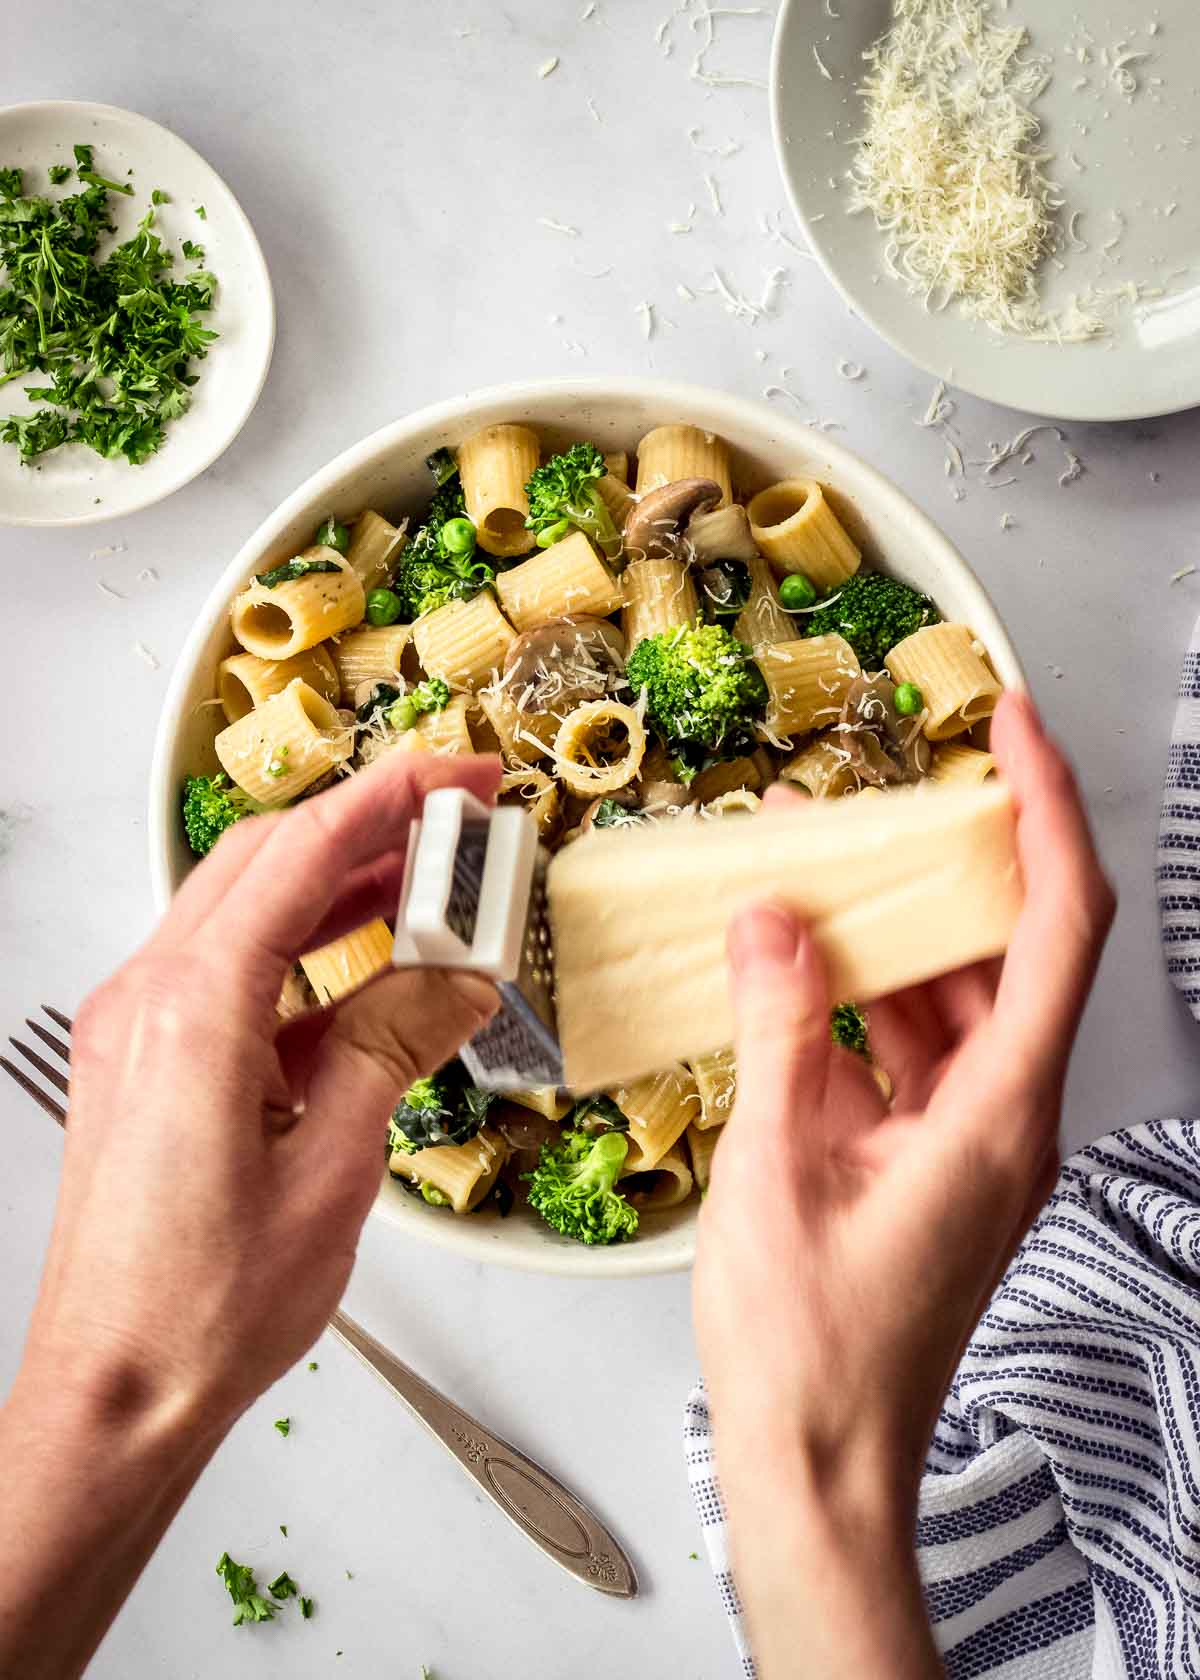 A woman's hands grate parmesan over a white bowl of pasta with mushrooms and broccoli. Dishes of parsley and parmesan surround it.